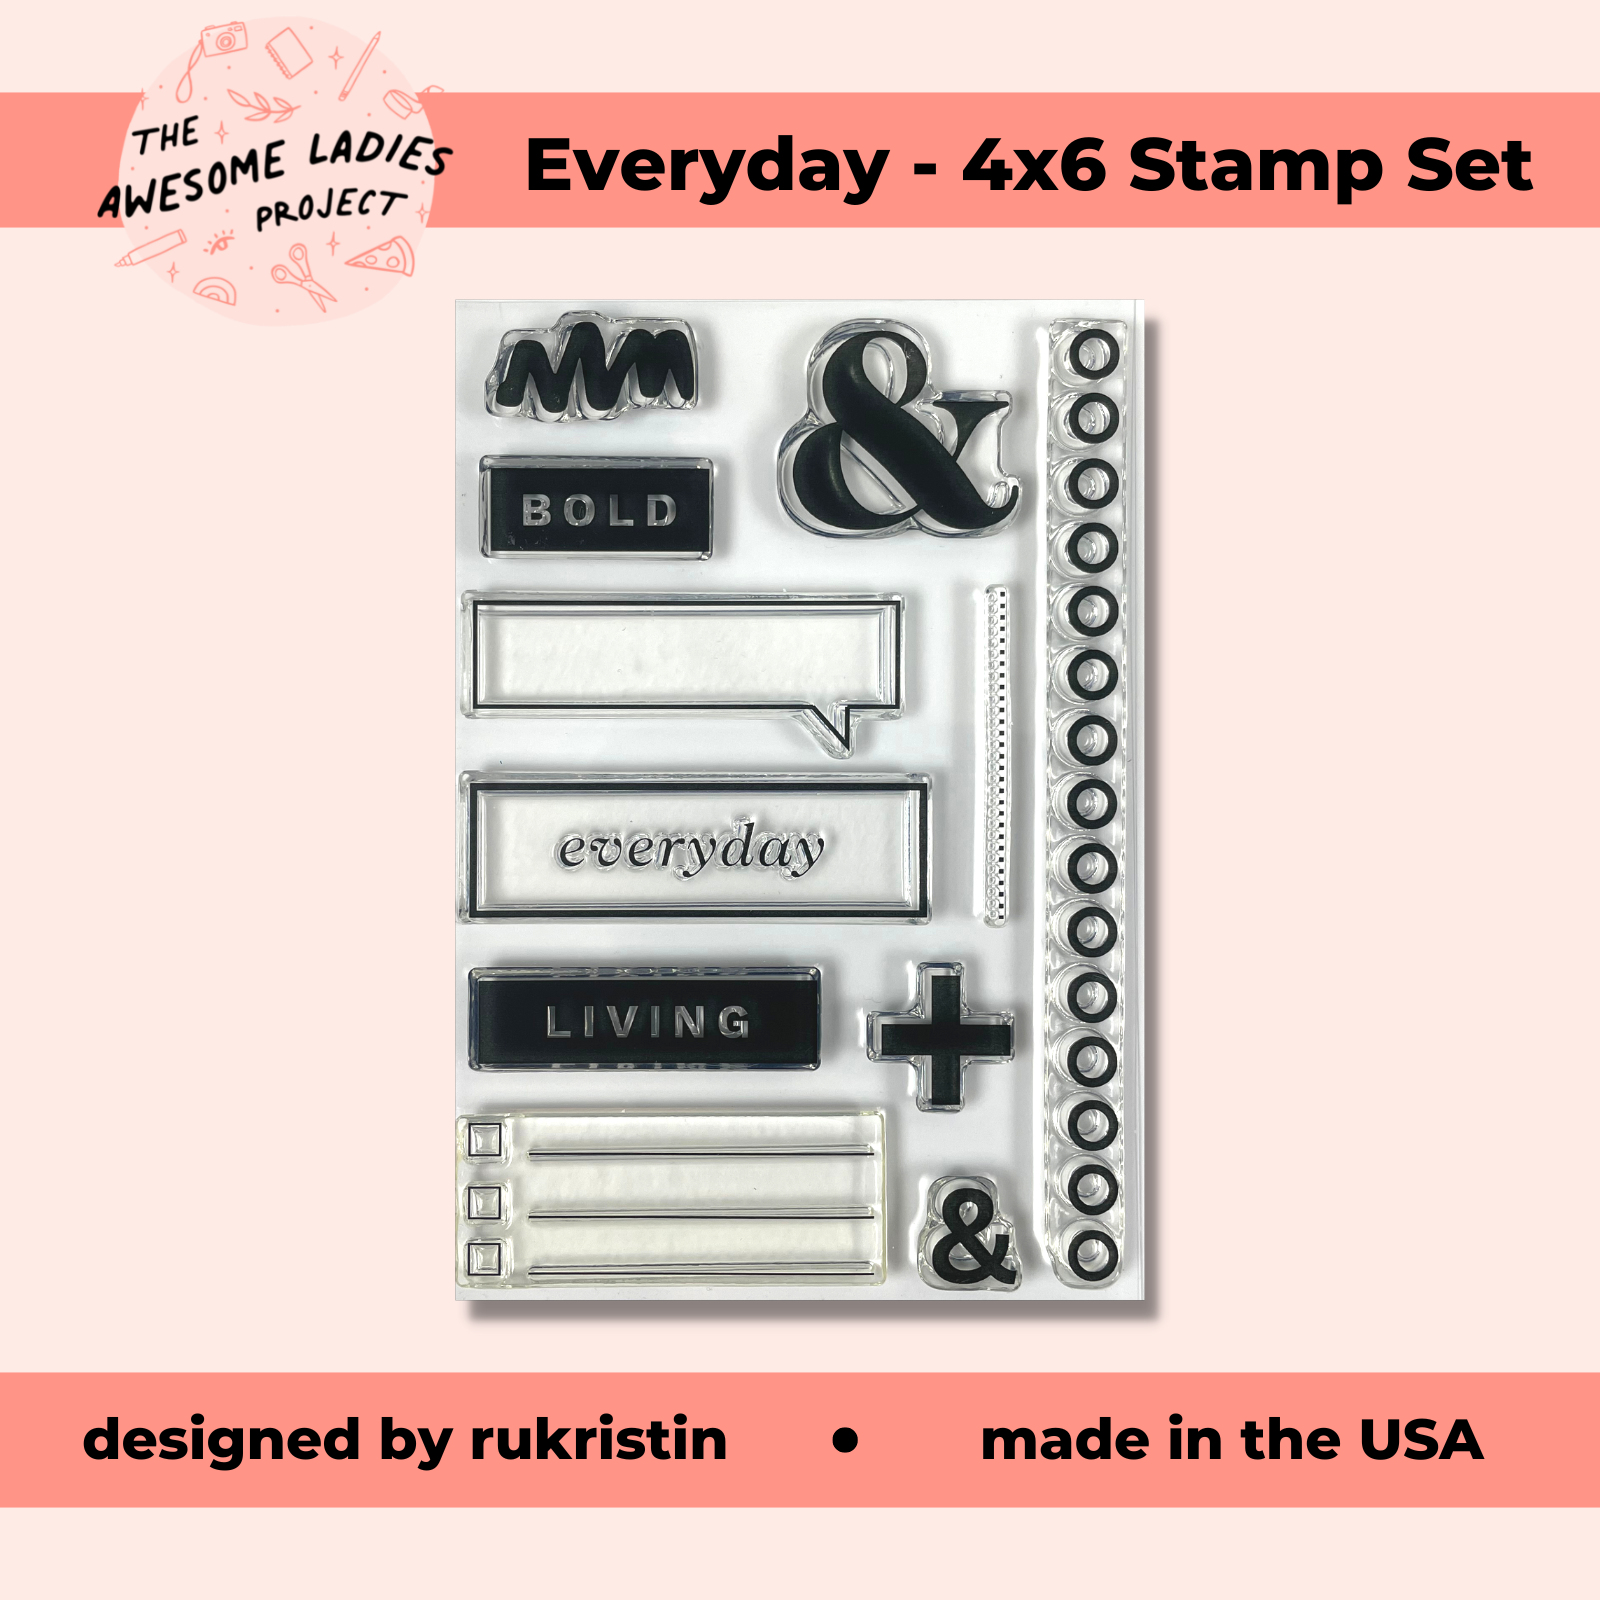 4x6 Clear Vinyl Stamp Sleeves - 5 Pack – The Awesome Ladies Project